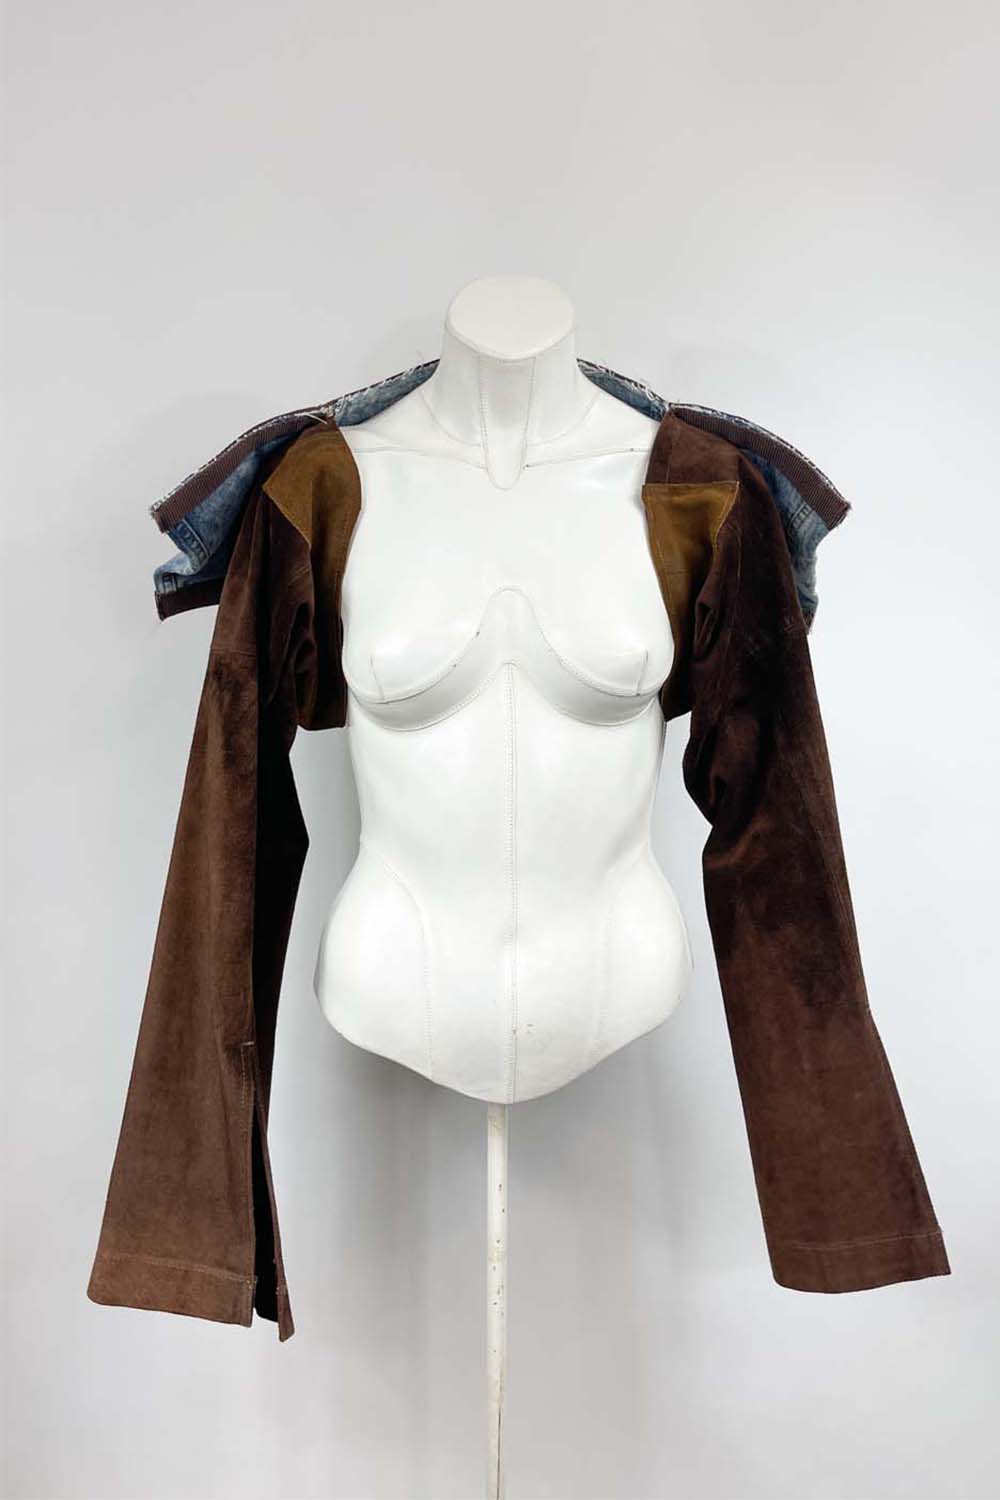 OKIMMI BROWN LEATHER AND DENIM TOP FRONT